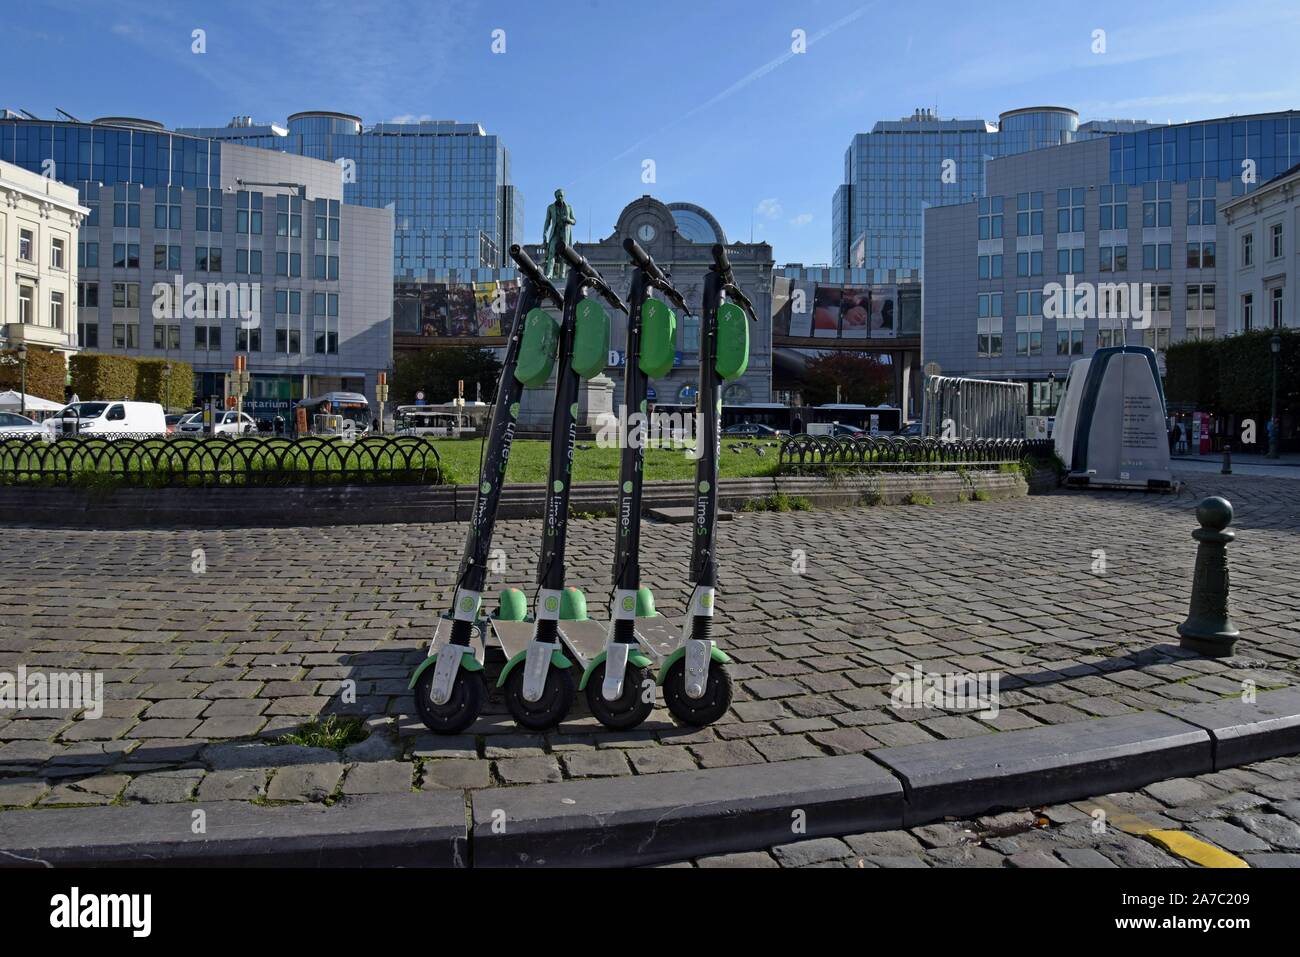 A row of Lime S dockless electric hire scooters in Place De Luxembourg, Brussels with the European Parliament buildings in the background Stock Photo